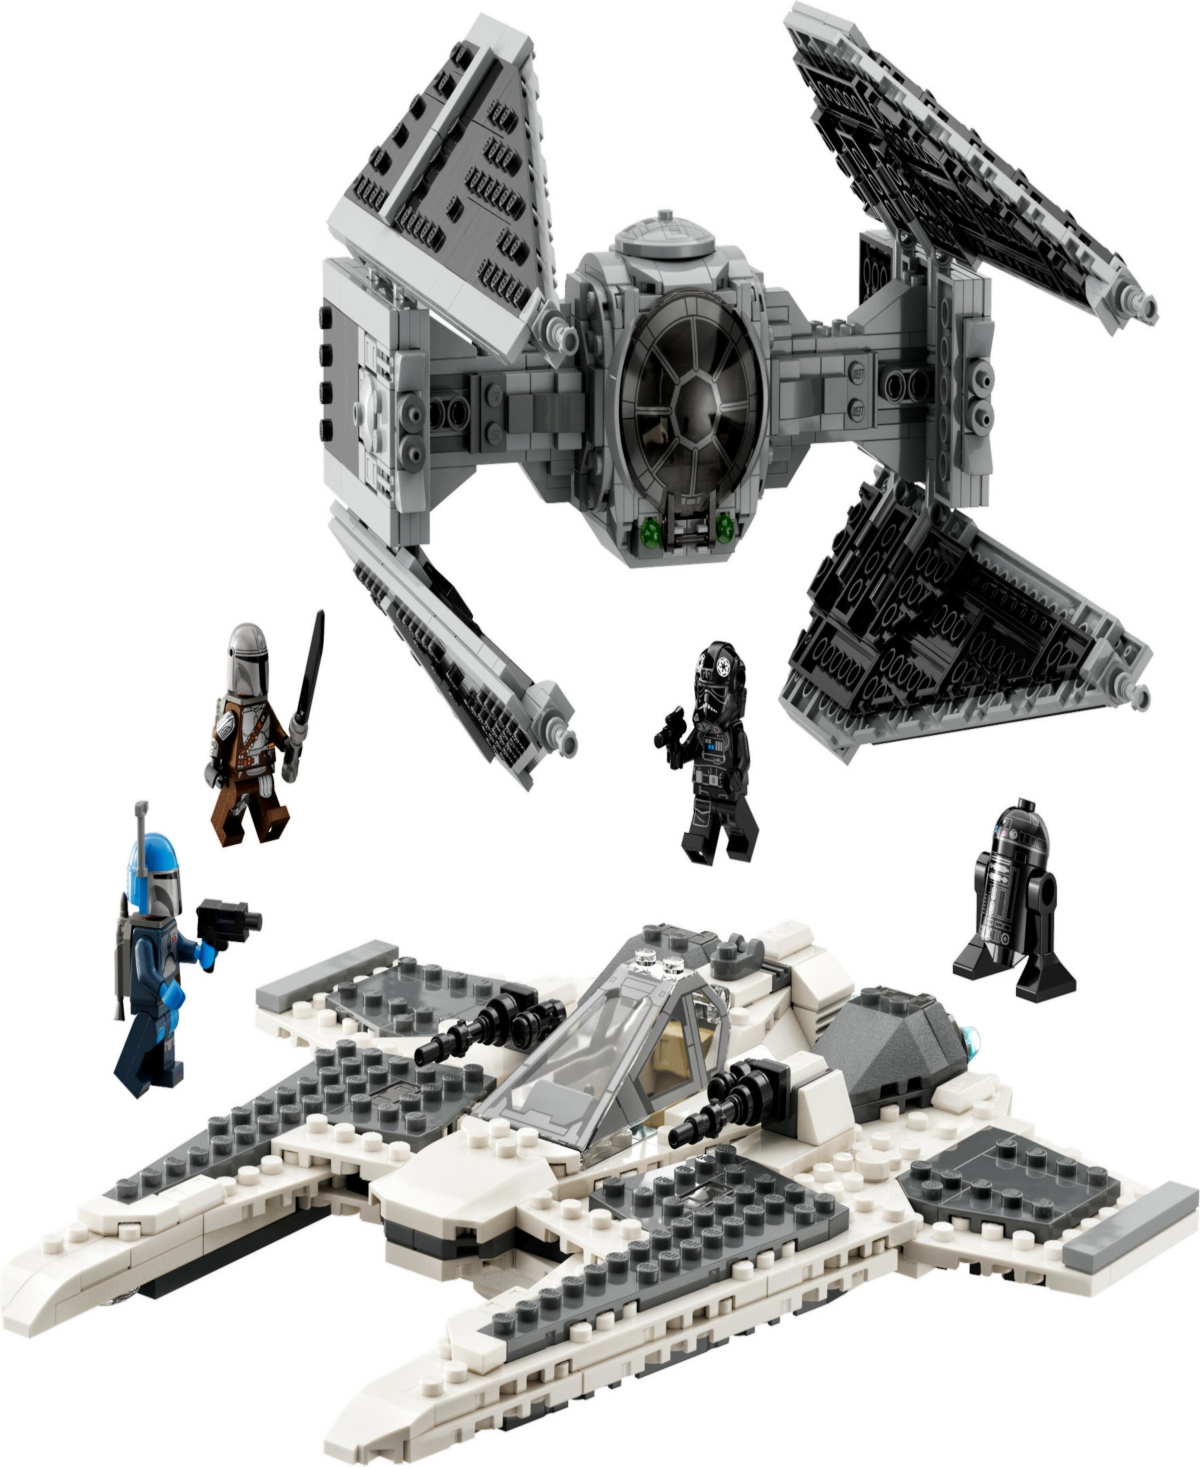 Shop Lego Star Wars 75348 Mandalorian Fang Fighter Vs. Tie Interceptor Toy Building Set With The Mandalorian,  In Multicolor